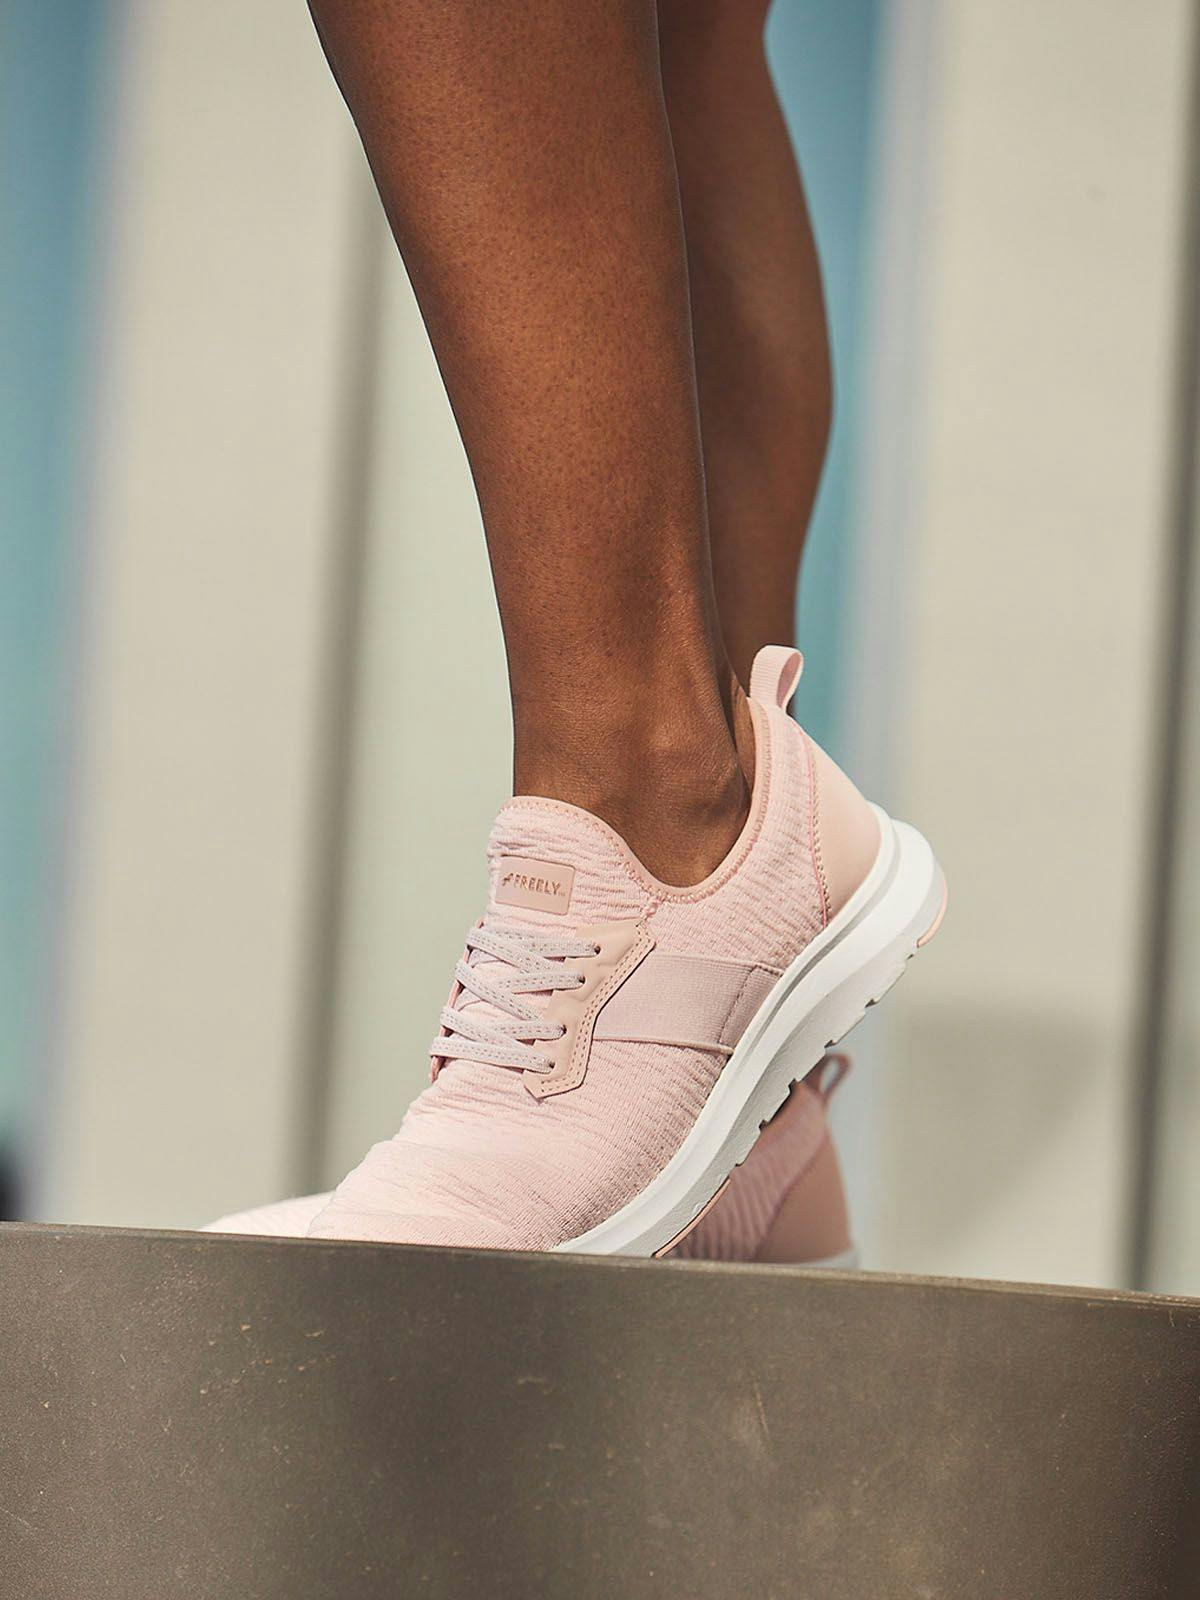 Woman Wearing Pink Athletic Shoes